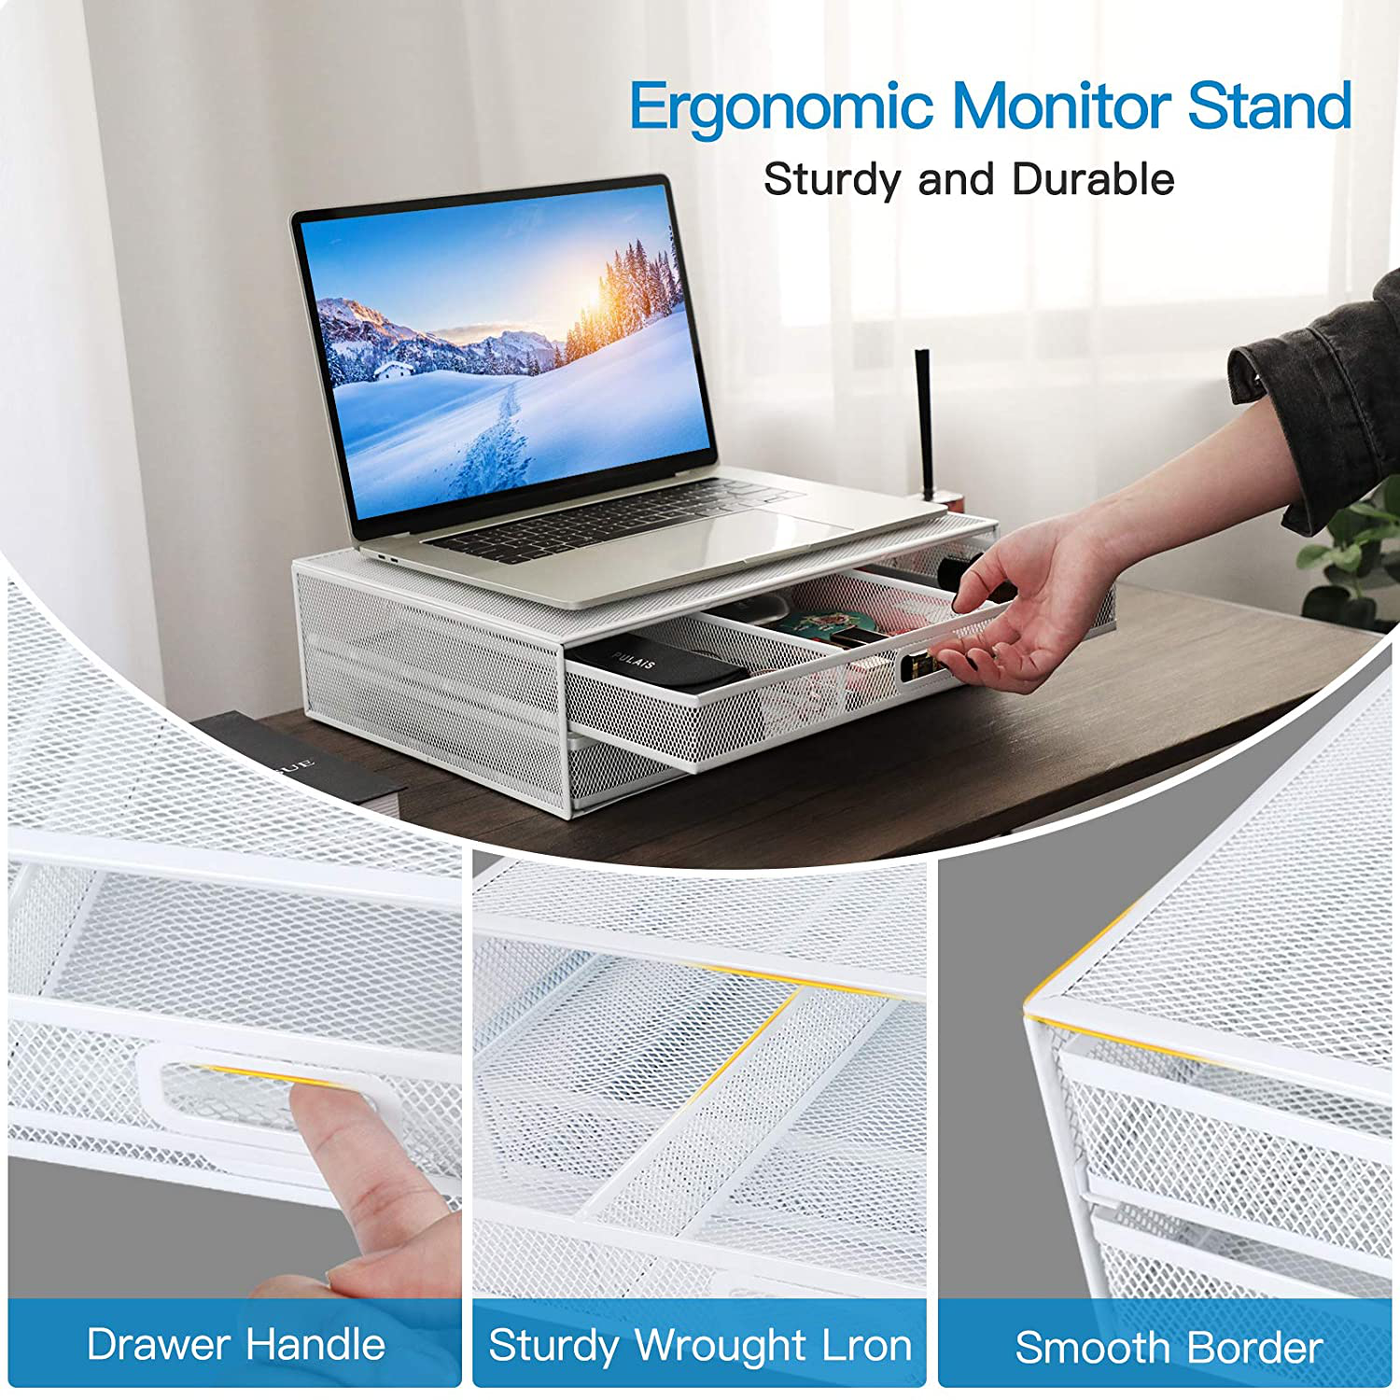 HUANUO Monitor Stand Riser with Drawer - Mesh Metal Desk Organizer PC, Laptop, Notebook, Printer Holder with Pull Out Storage Drawer (White)